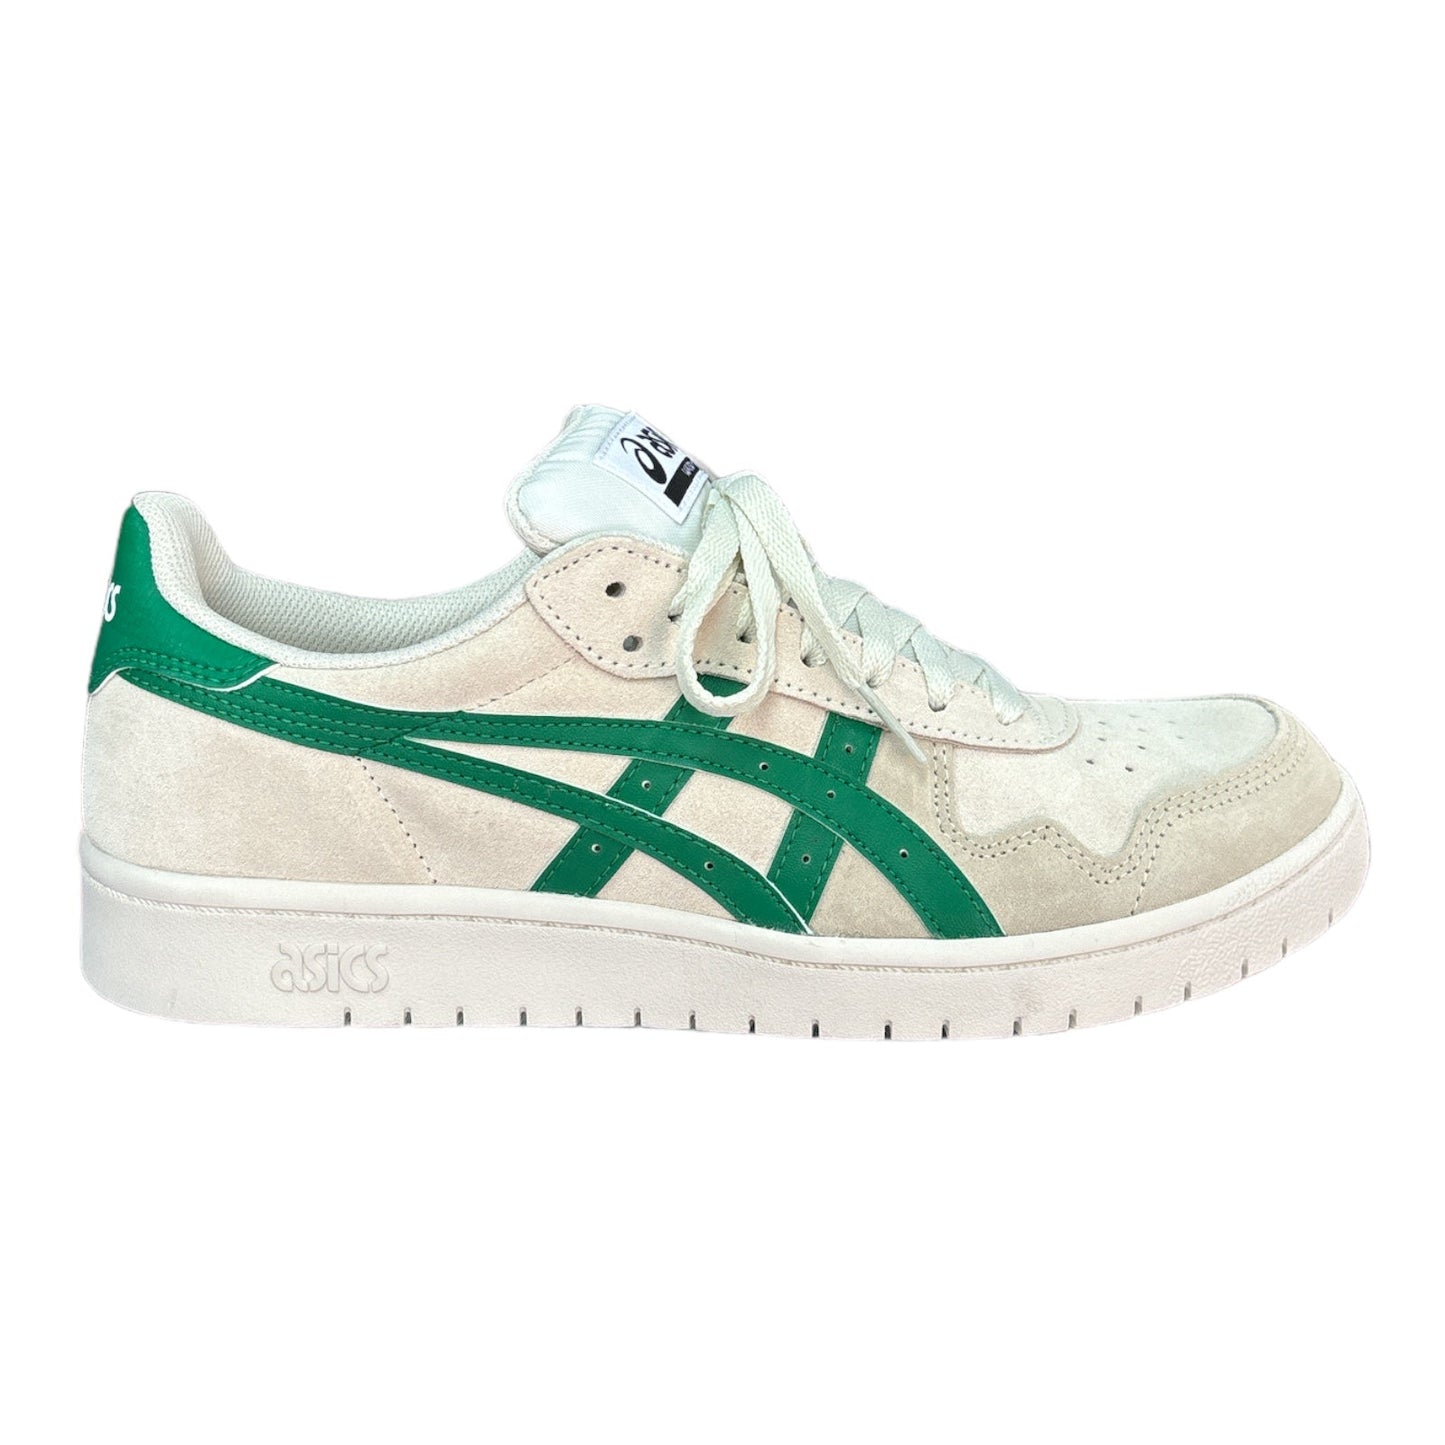 White Suede Upper with Green Asics Logo